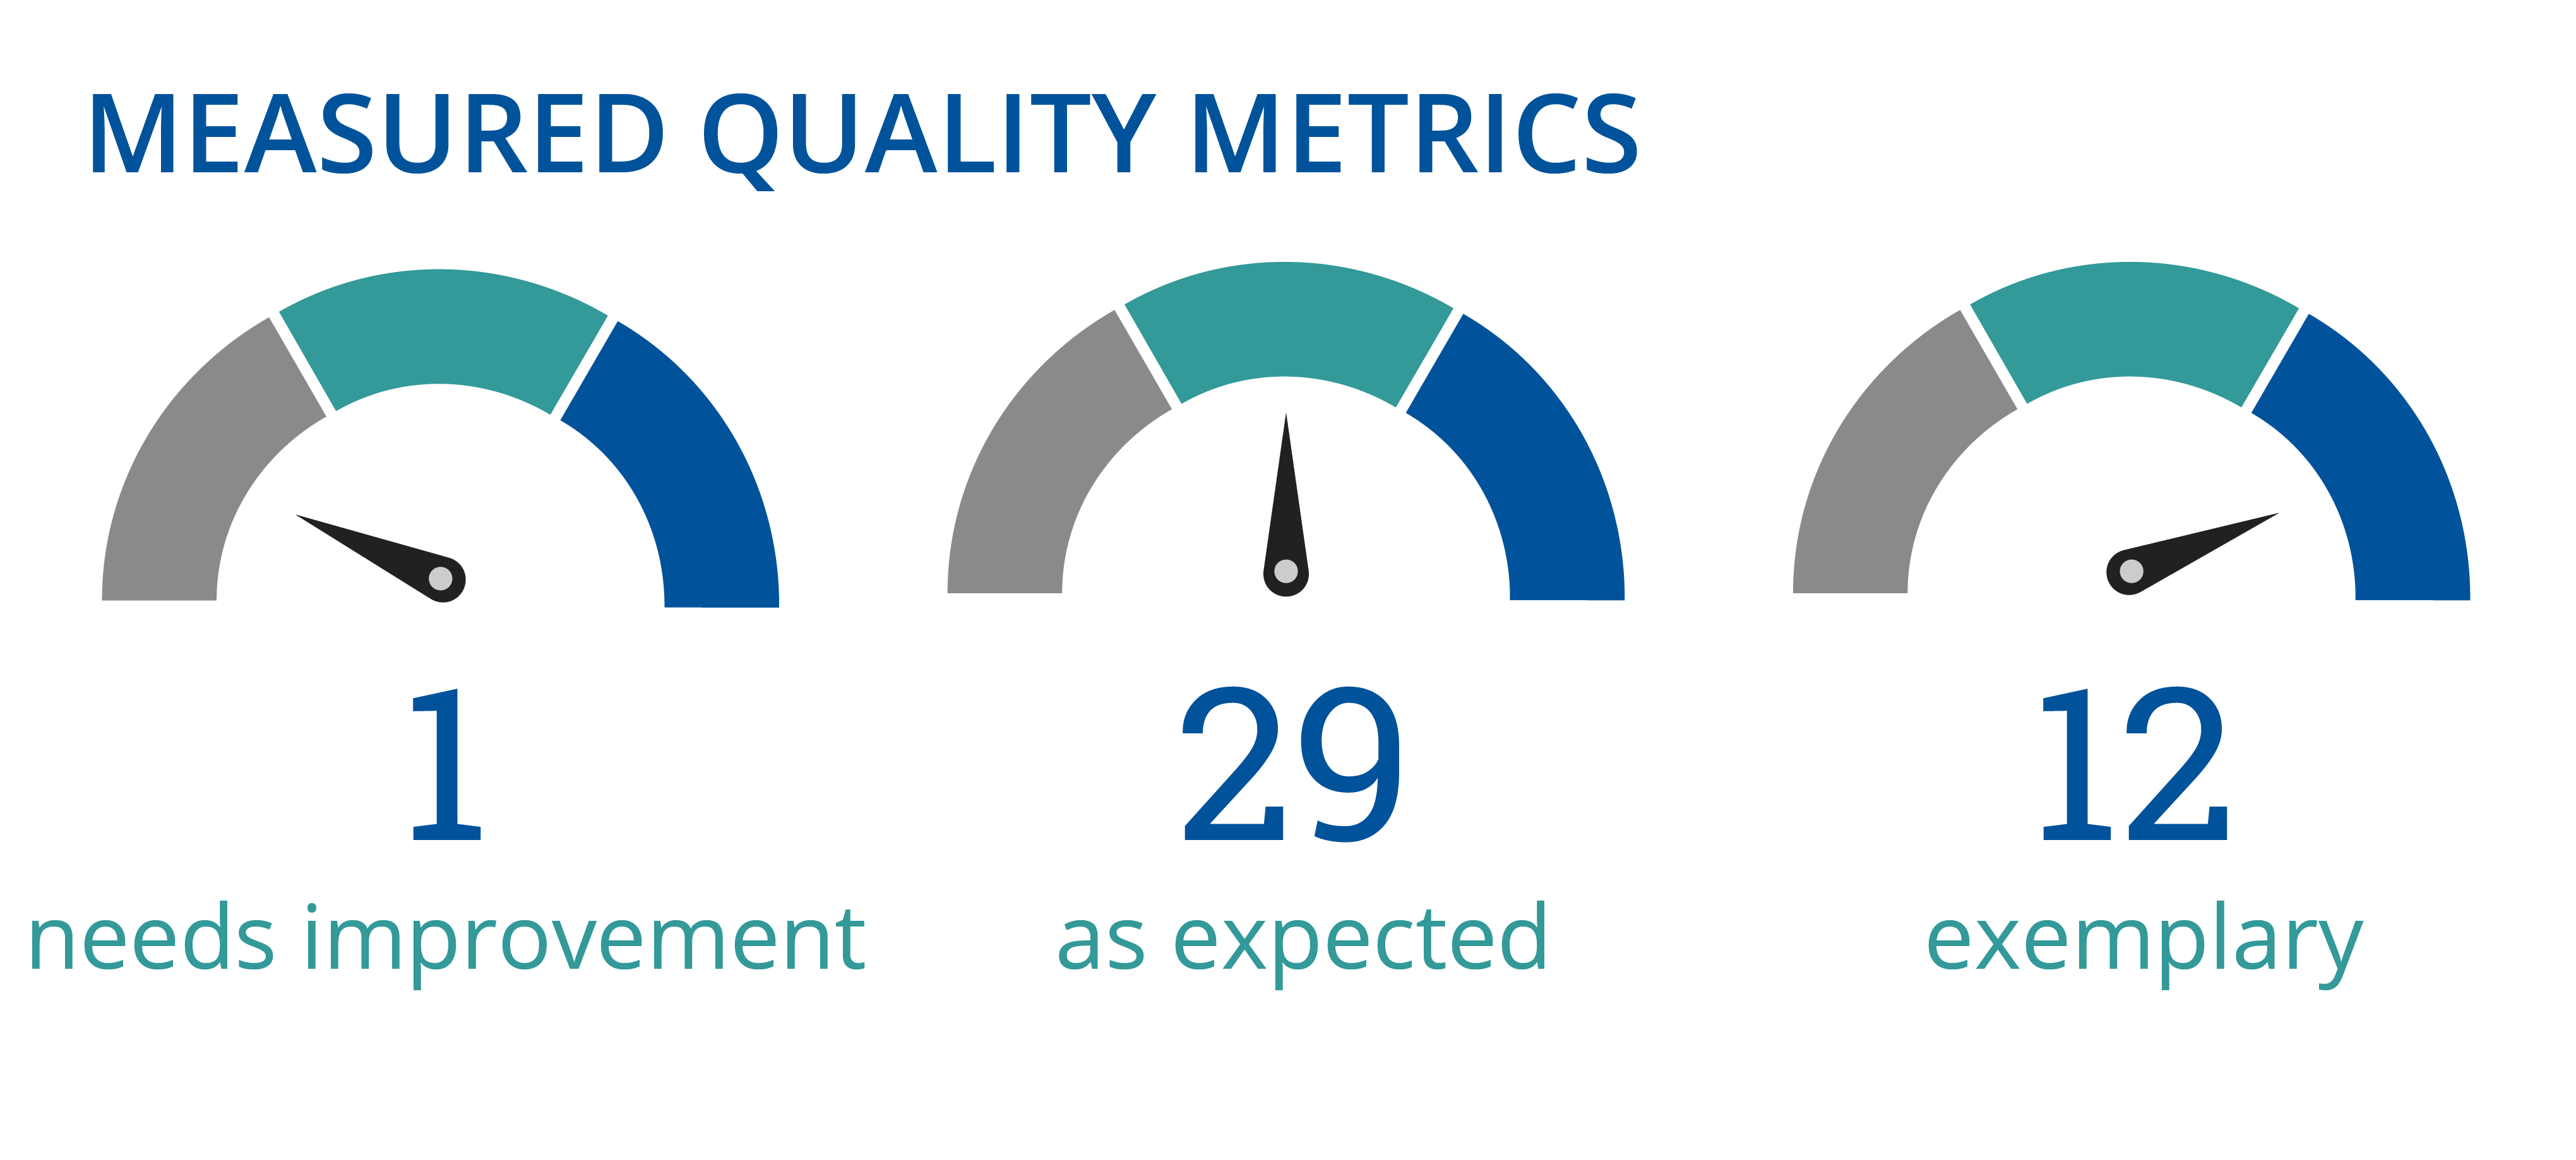 Illustration showing measured quality metrics with one area at 'needs improvement,' 29 at 'as expected,' and 12 at 'exemplary.'